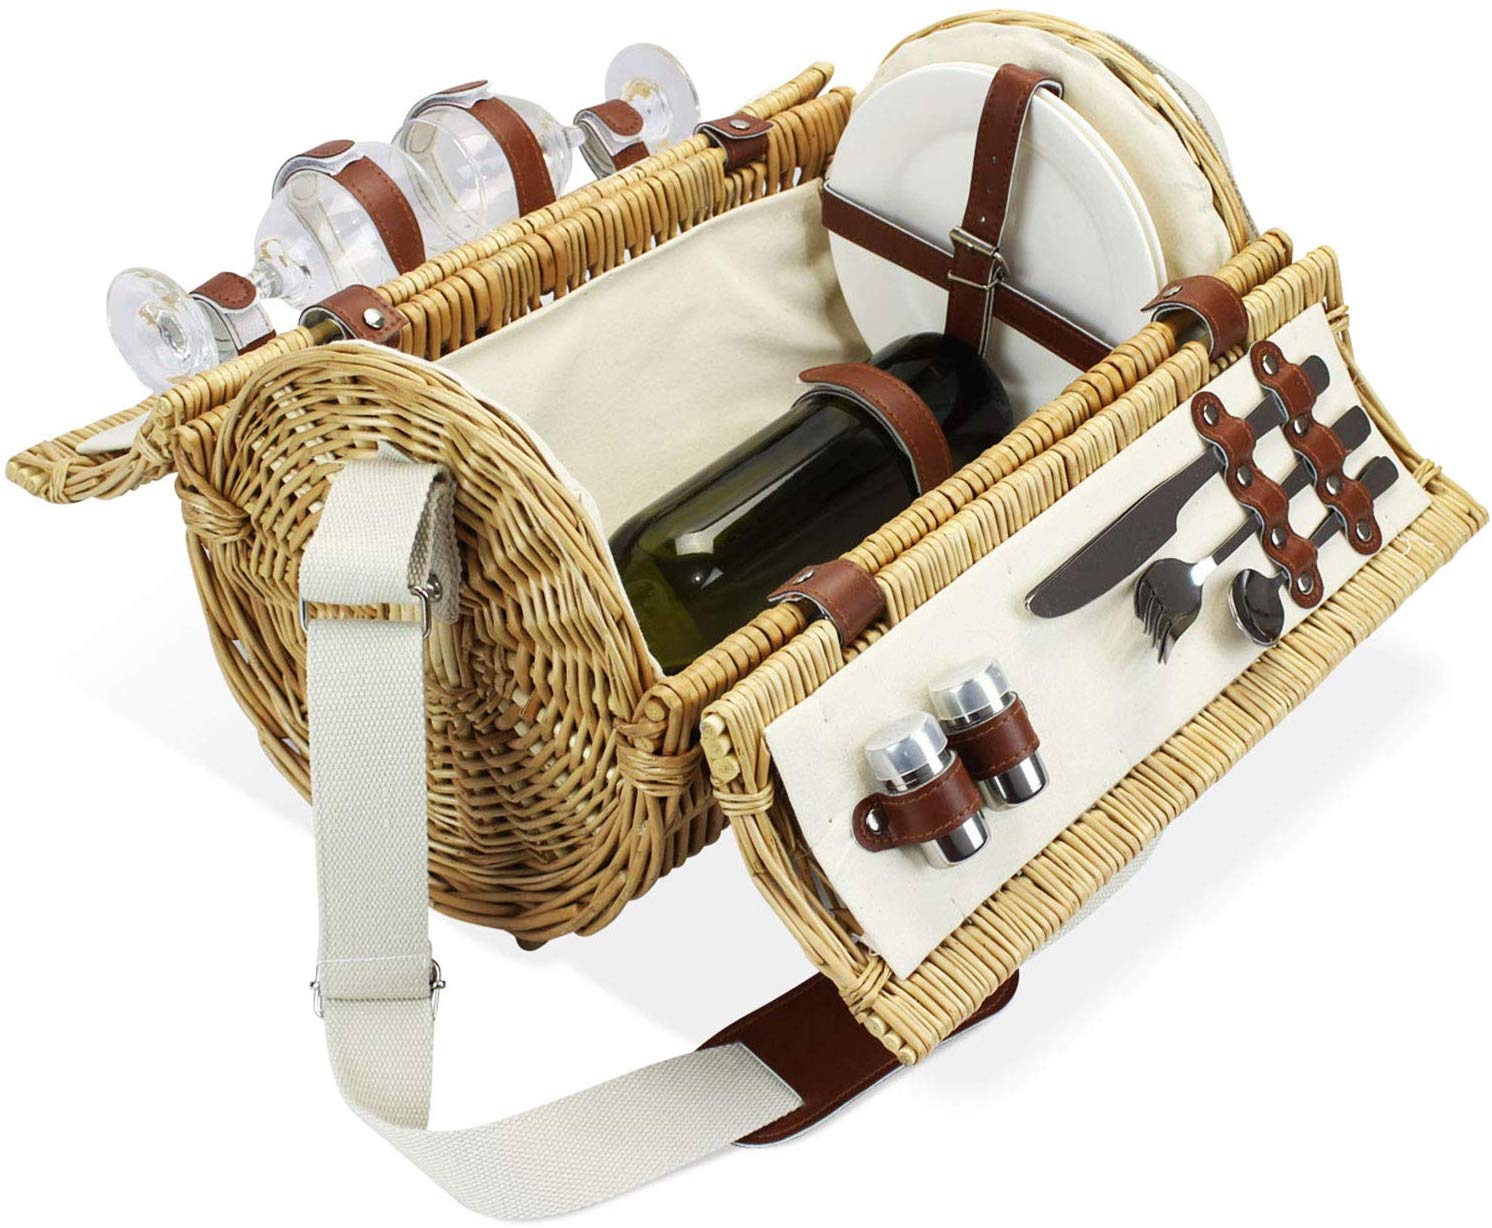 Home Innovation 2 Person Wicker Picnic Basket Set with Straps